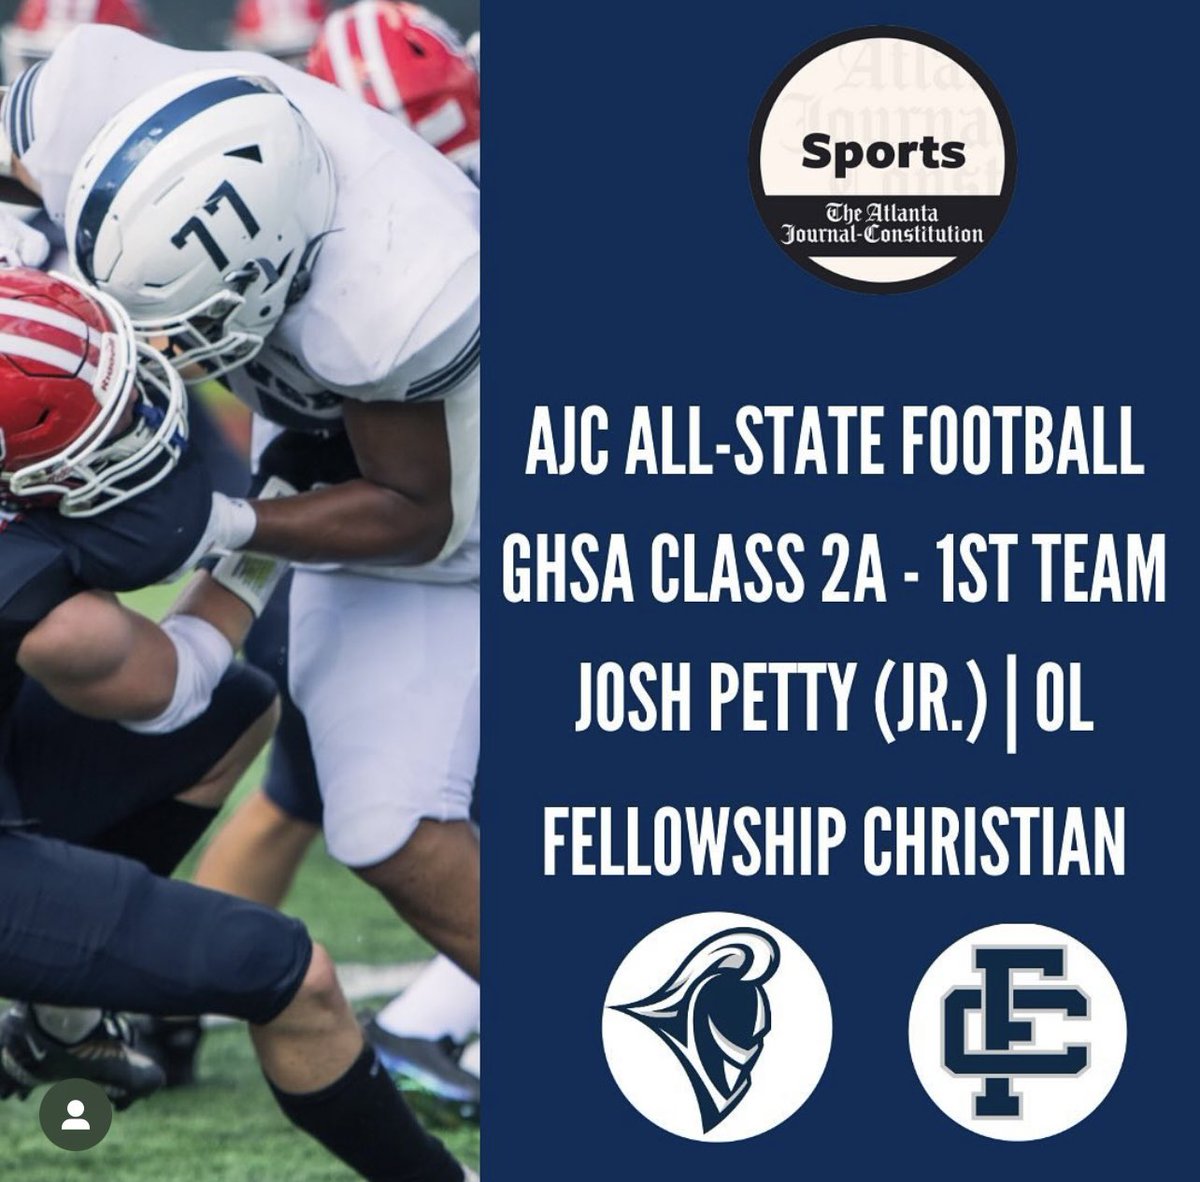 Thank you @AJCsports for First team all-state and selection to the North Fulton all metro team @RustyMansell_ @coachjakediesel @ChadSimmons_ @JeremyO_Johnson @adamgorney @RecruitGeorgia @PaladinsFCS @coachmitchler @velocity_fb @RyanWrightRNG @SWiltfong247 @Andrew_Ivins